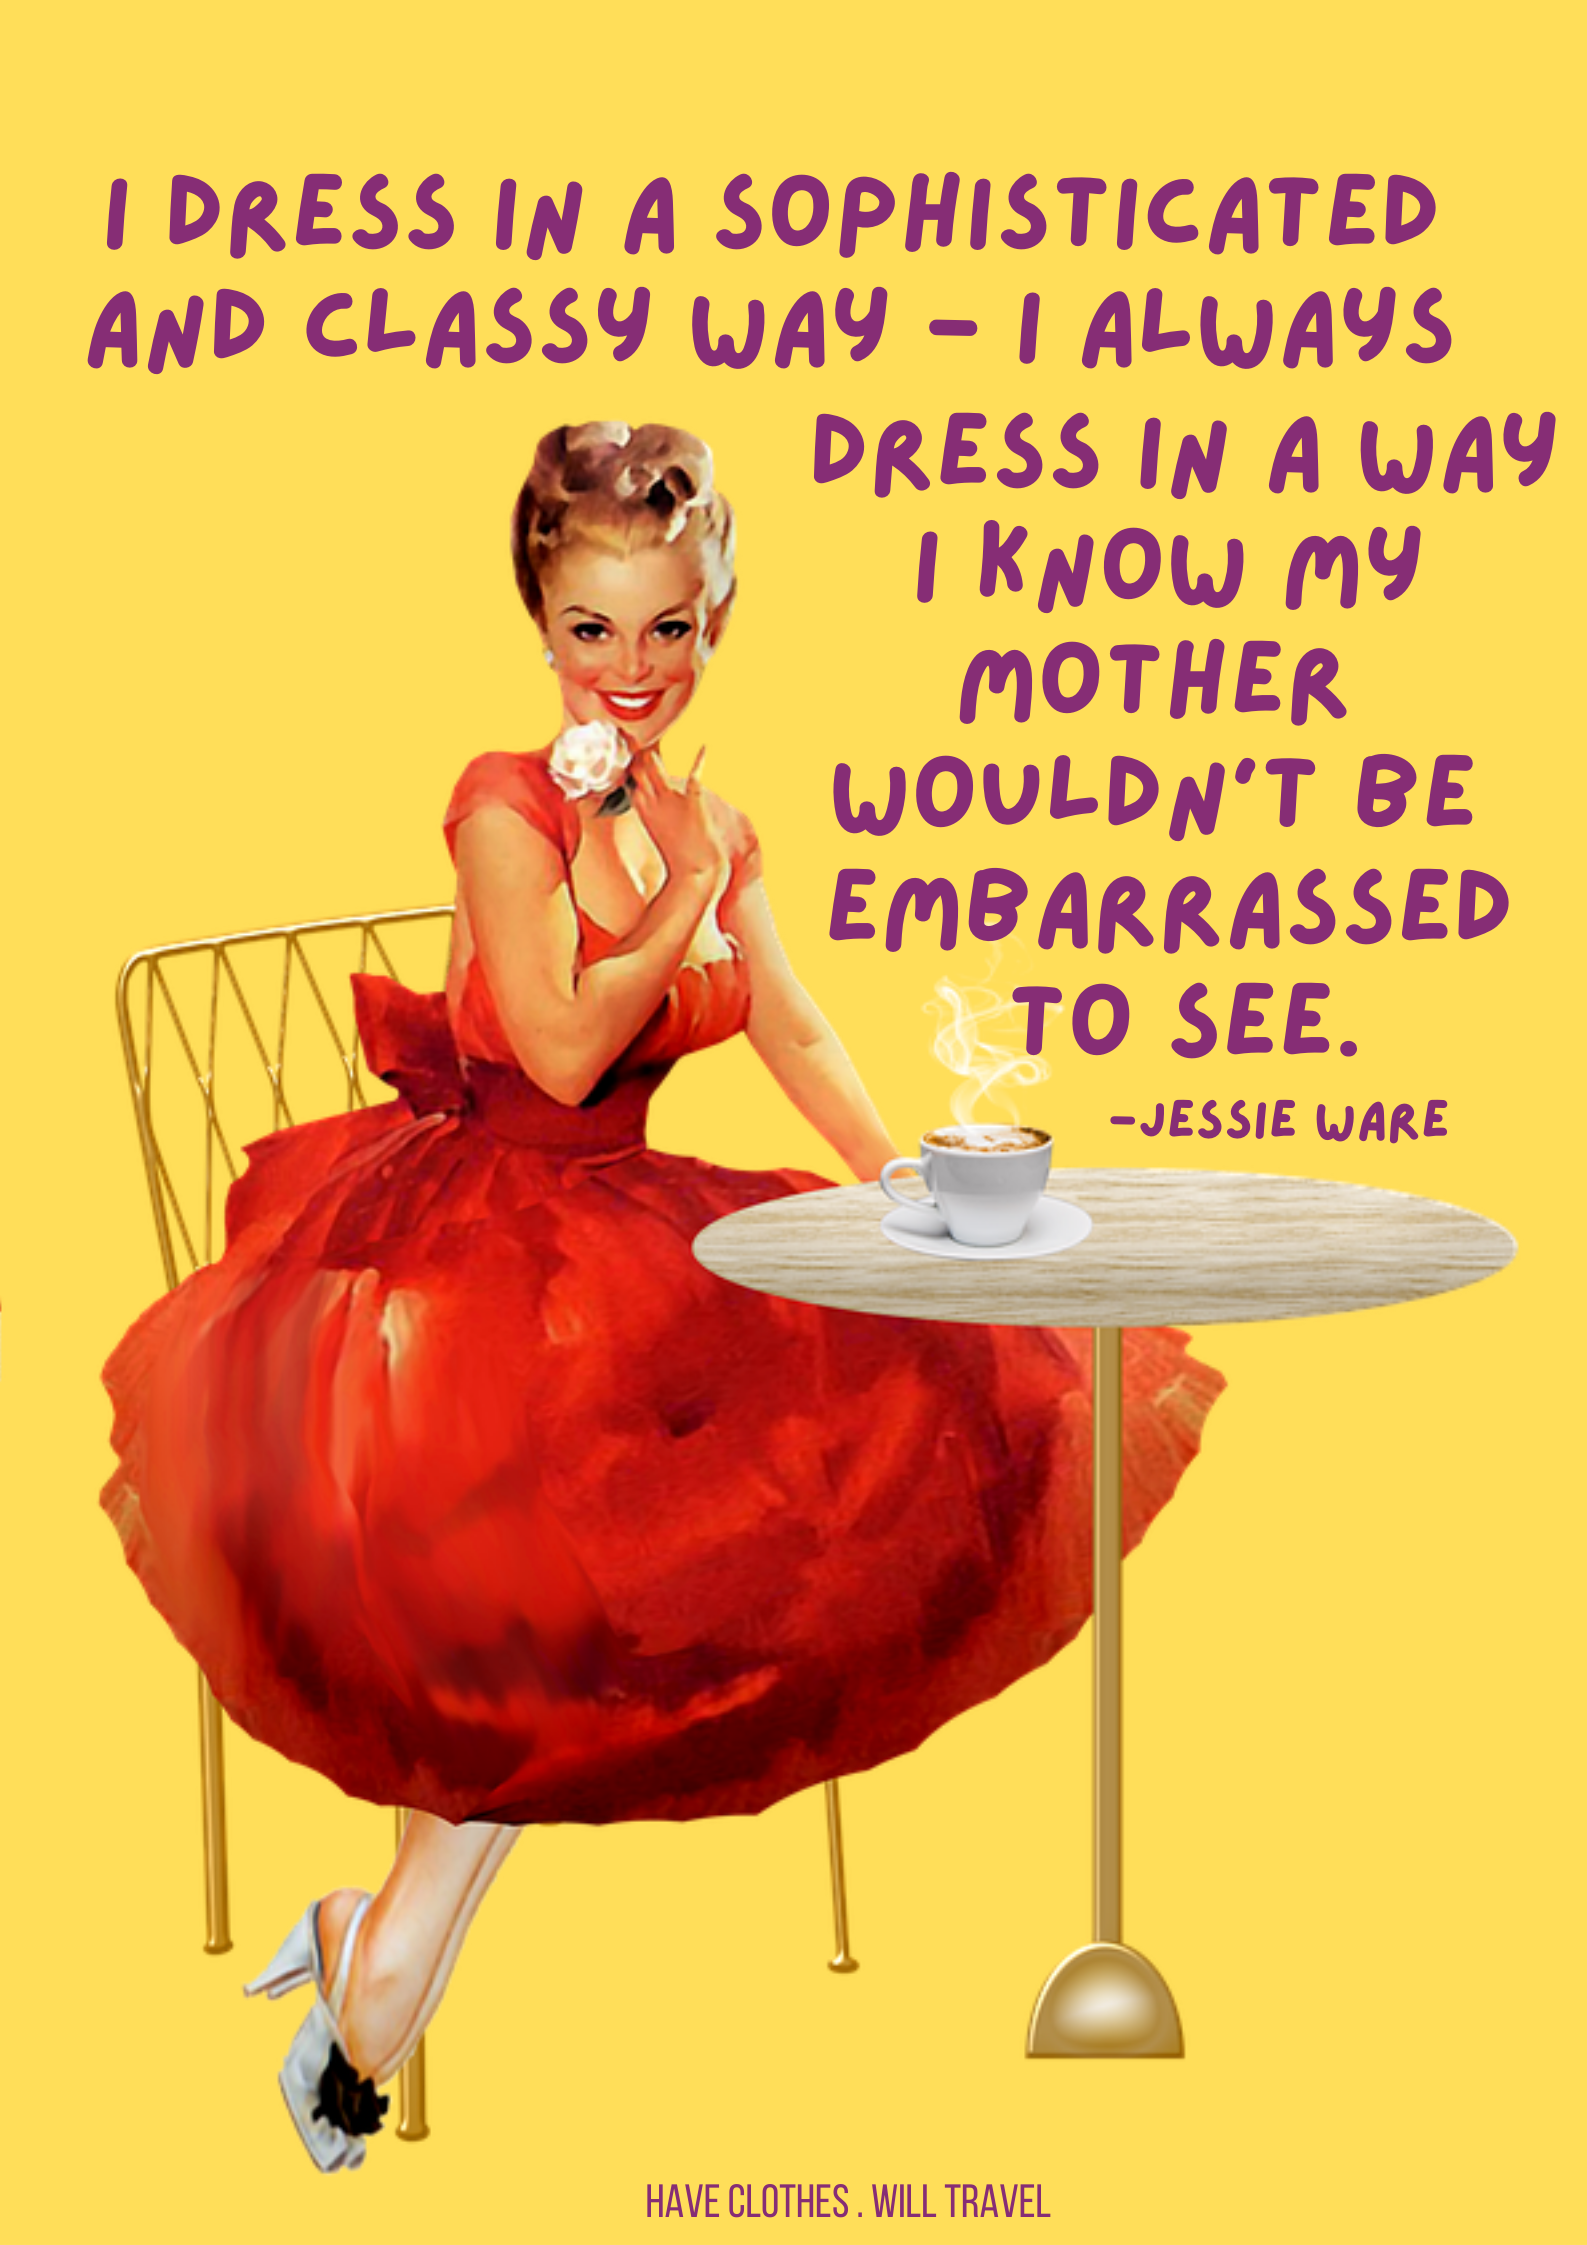 An image of a vintage-style housewife, depicted wearing a romantic red dress, sitting at a table with a cup of coffee. Purple text against a bright yellow background says, "I dress in a sophisticated and classy way - I always dress in a way I know my mother wouldn't be embarrassed to see. - Jessie Ware"